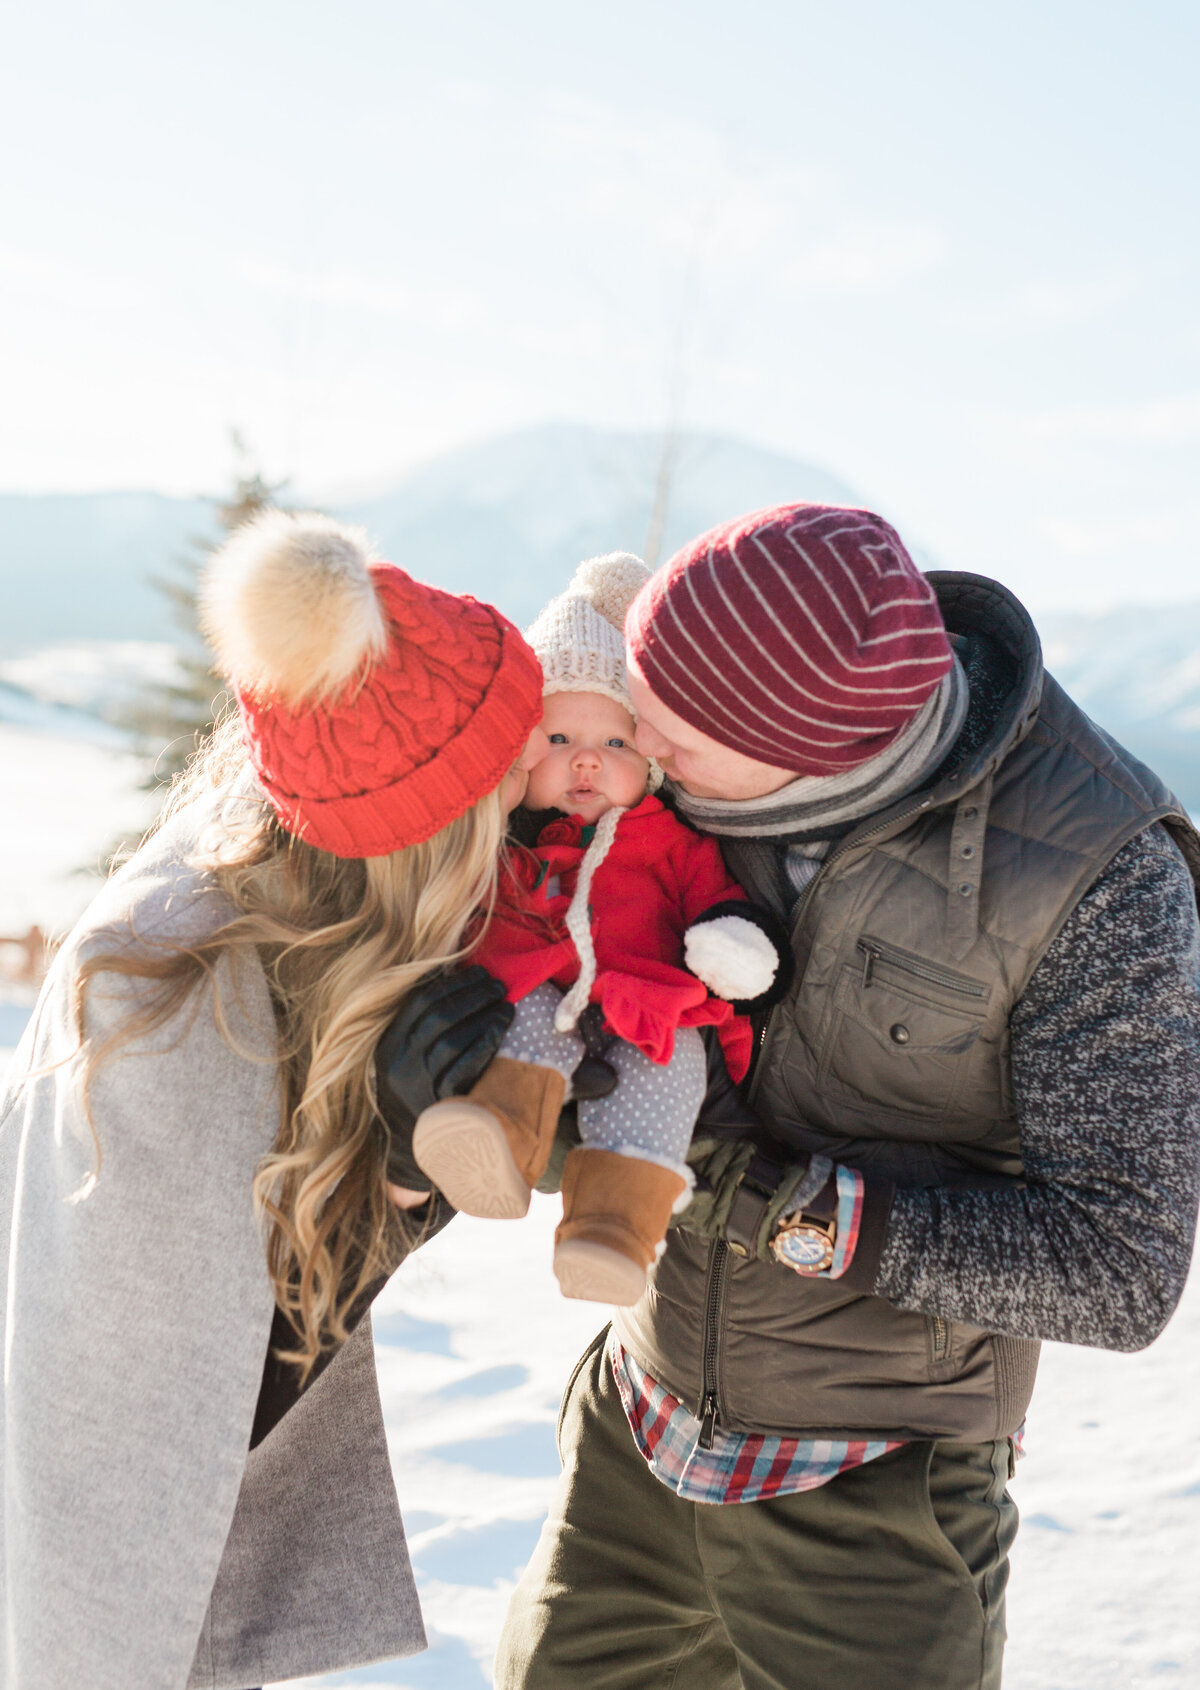 This family of 3 is tightly bundled up for winter. They have their newborn son between them are kissing him on each cheeck.